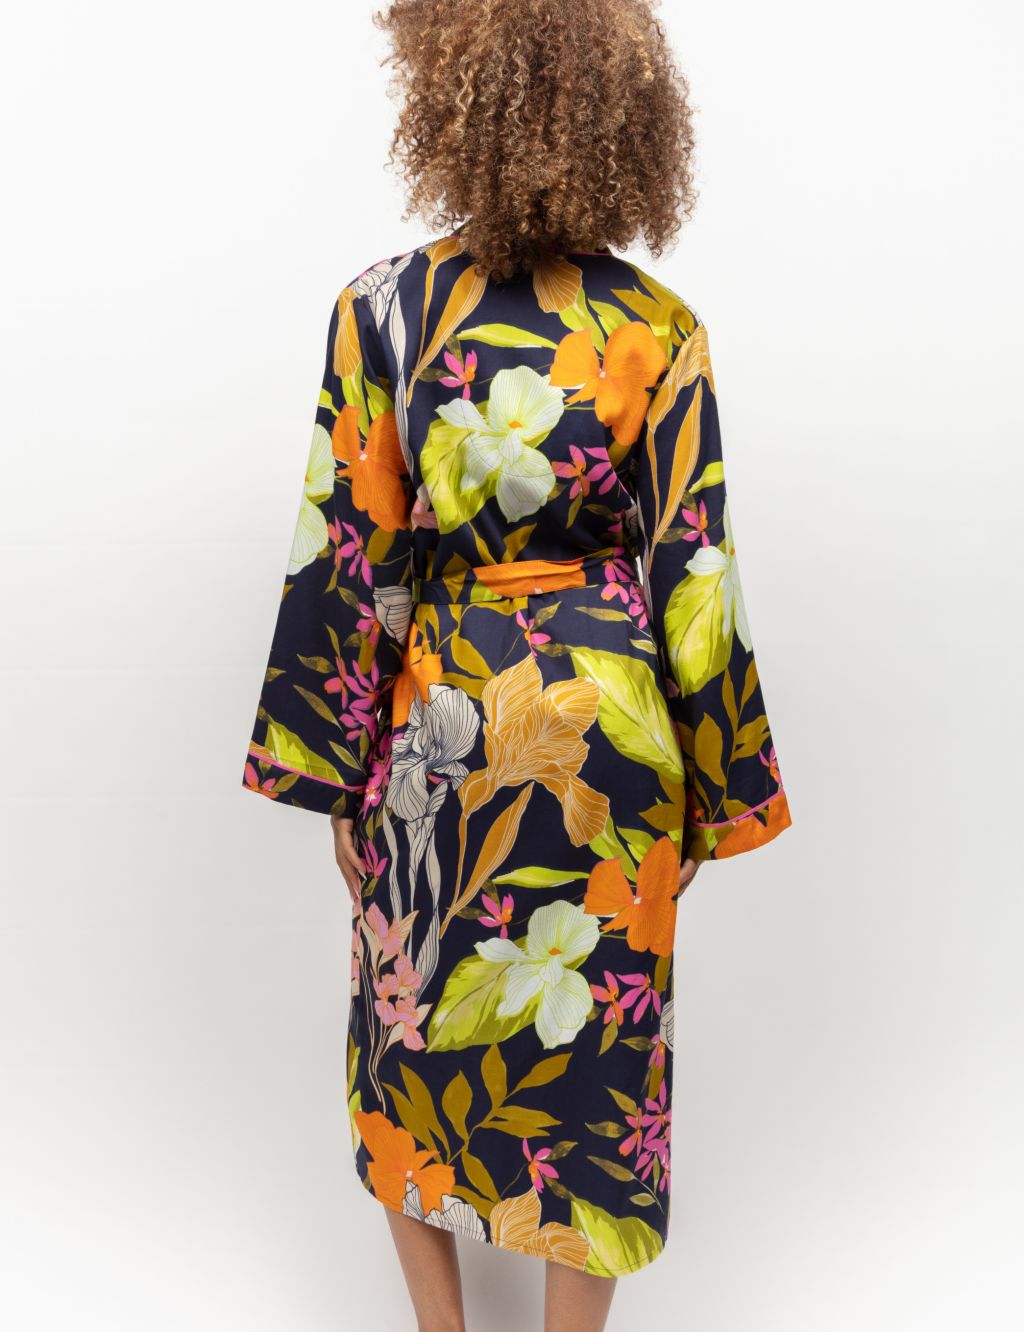 Cotton Modal Floral Dressing Gown image 4